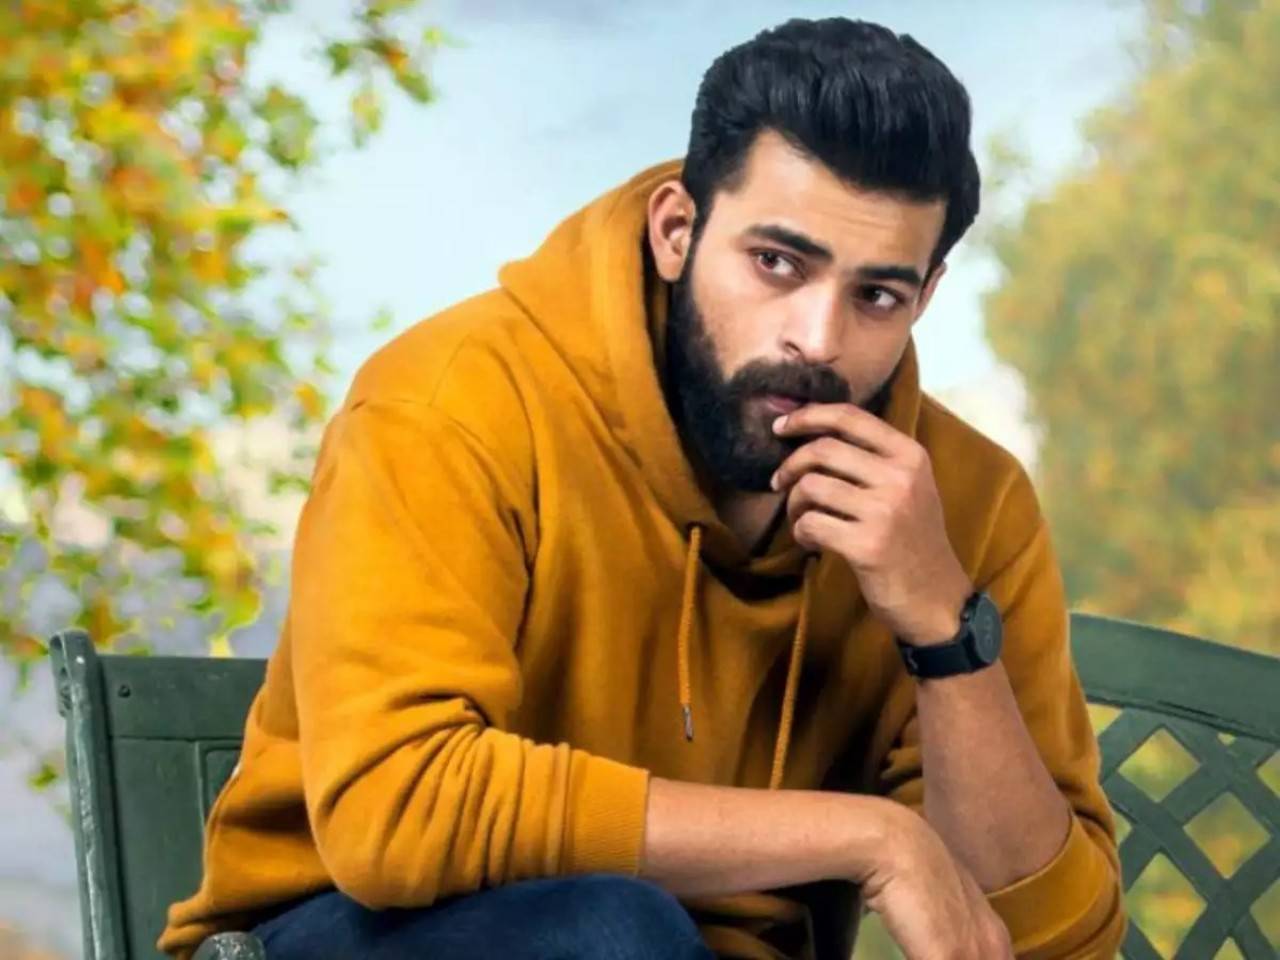 Varun Tej revealed his recent crush and more in an interesting Q&A ...